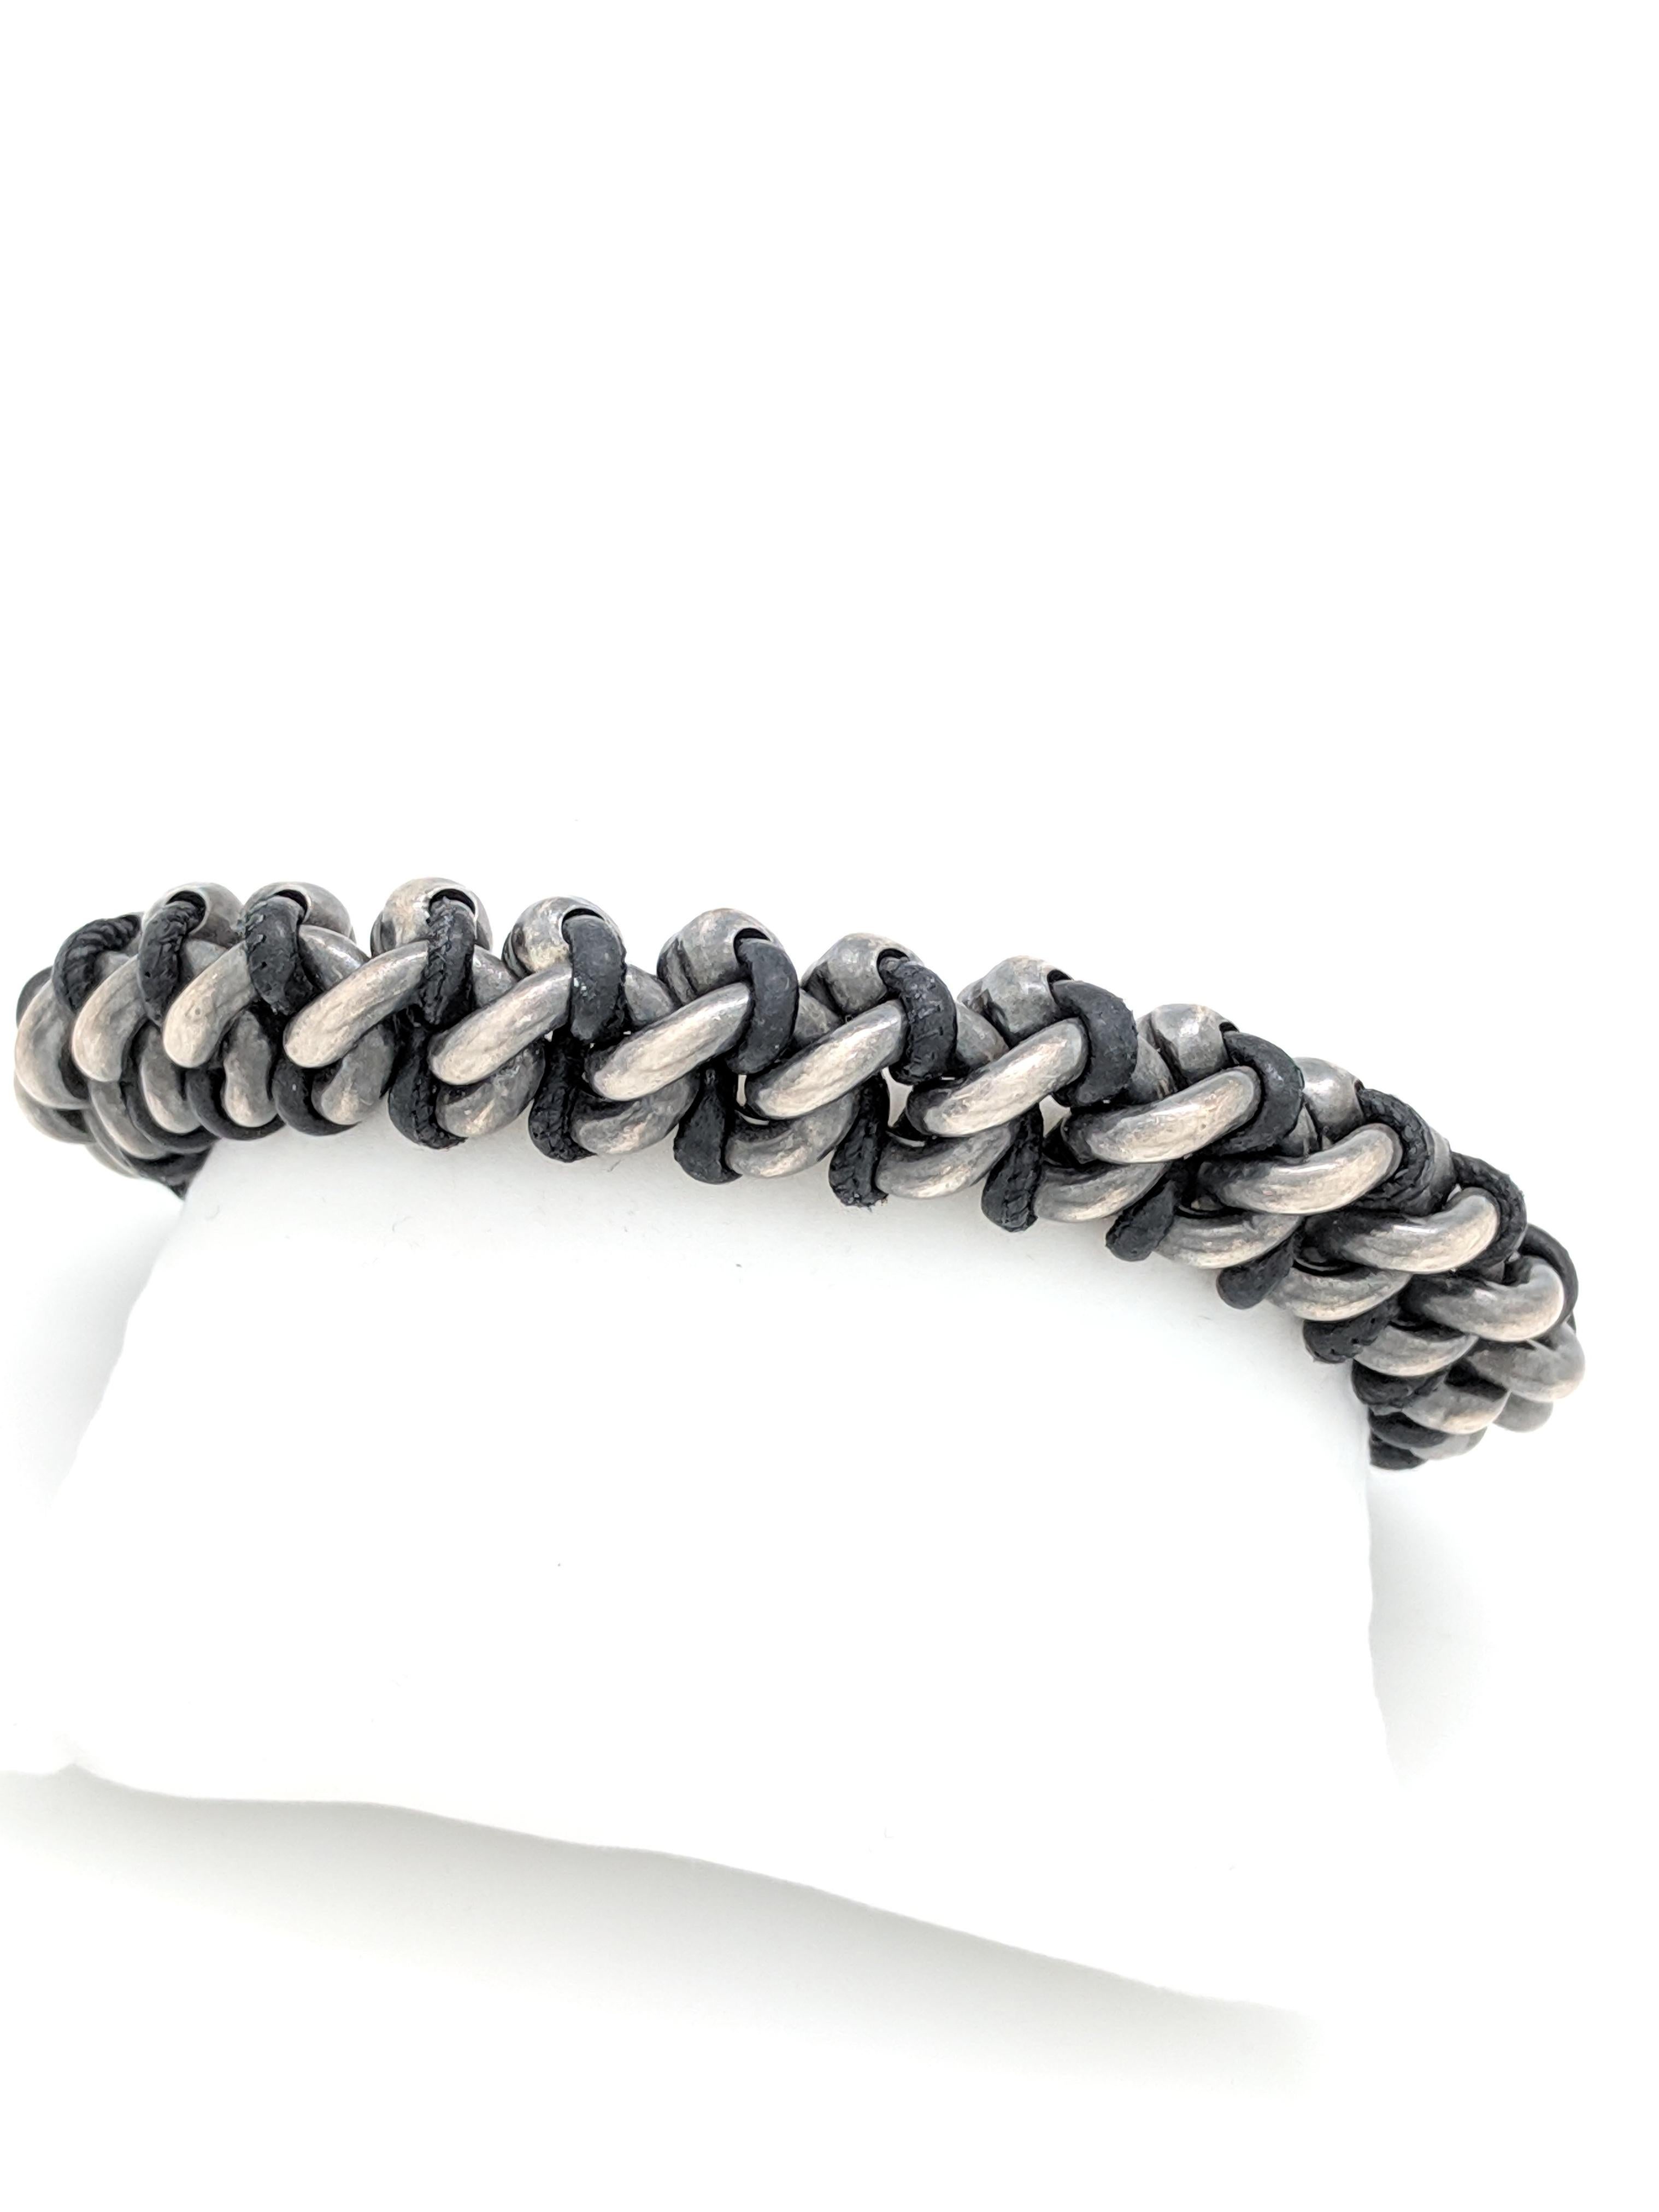 Authentic Bottega Veneta Men's Black Oxidized-Silver and Woven Leather Bracelet

You are viewing an Authentic Bottega Veneta Men's Black Oxidized-Silver and Woven Leather Bracelet. This bracelet is crafted from sterling silver and black leather. It